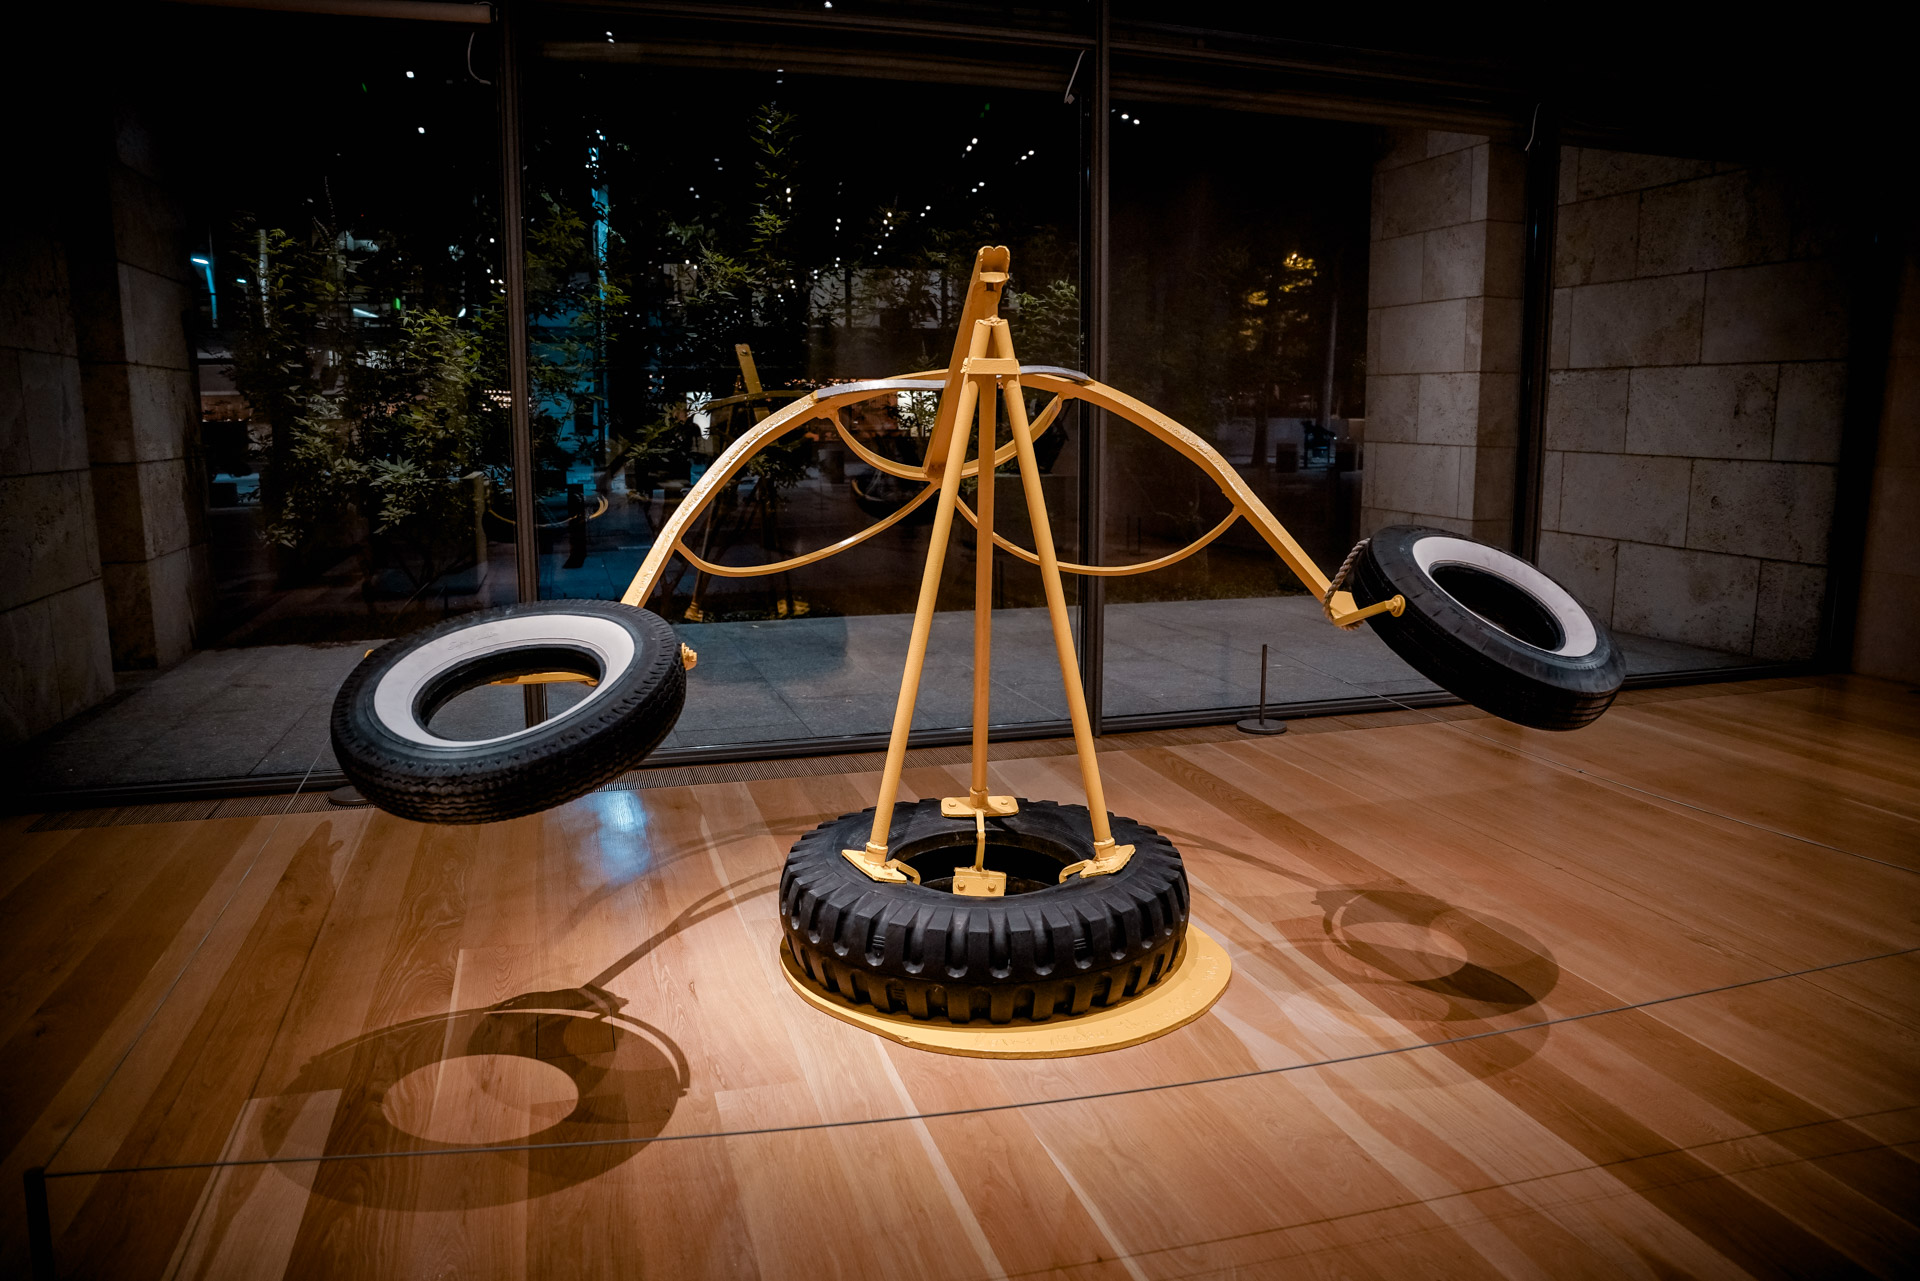 A large sculpture with tires on each side